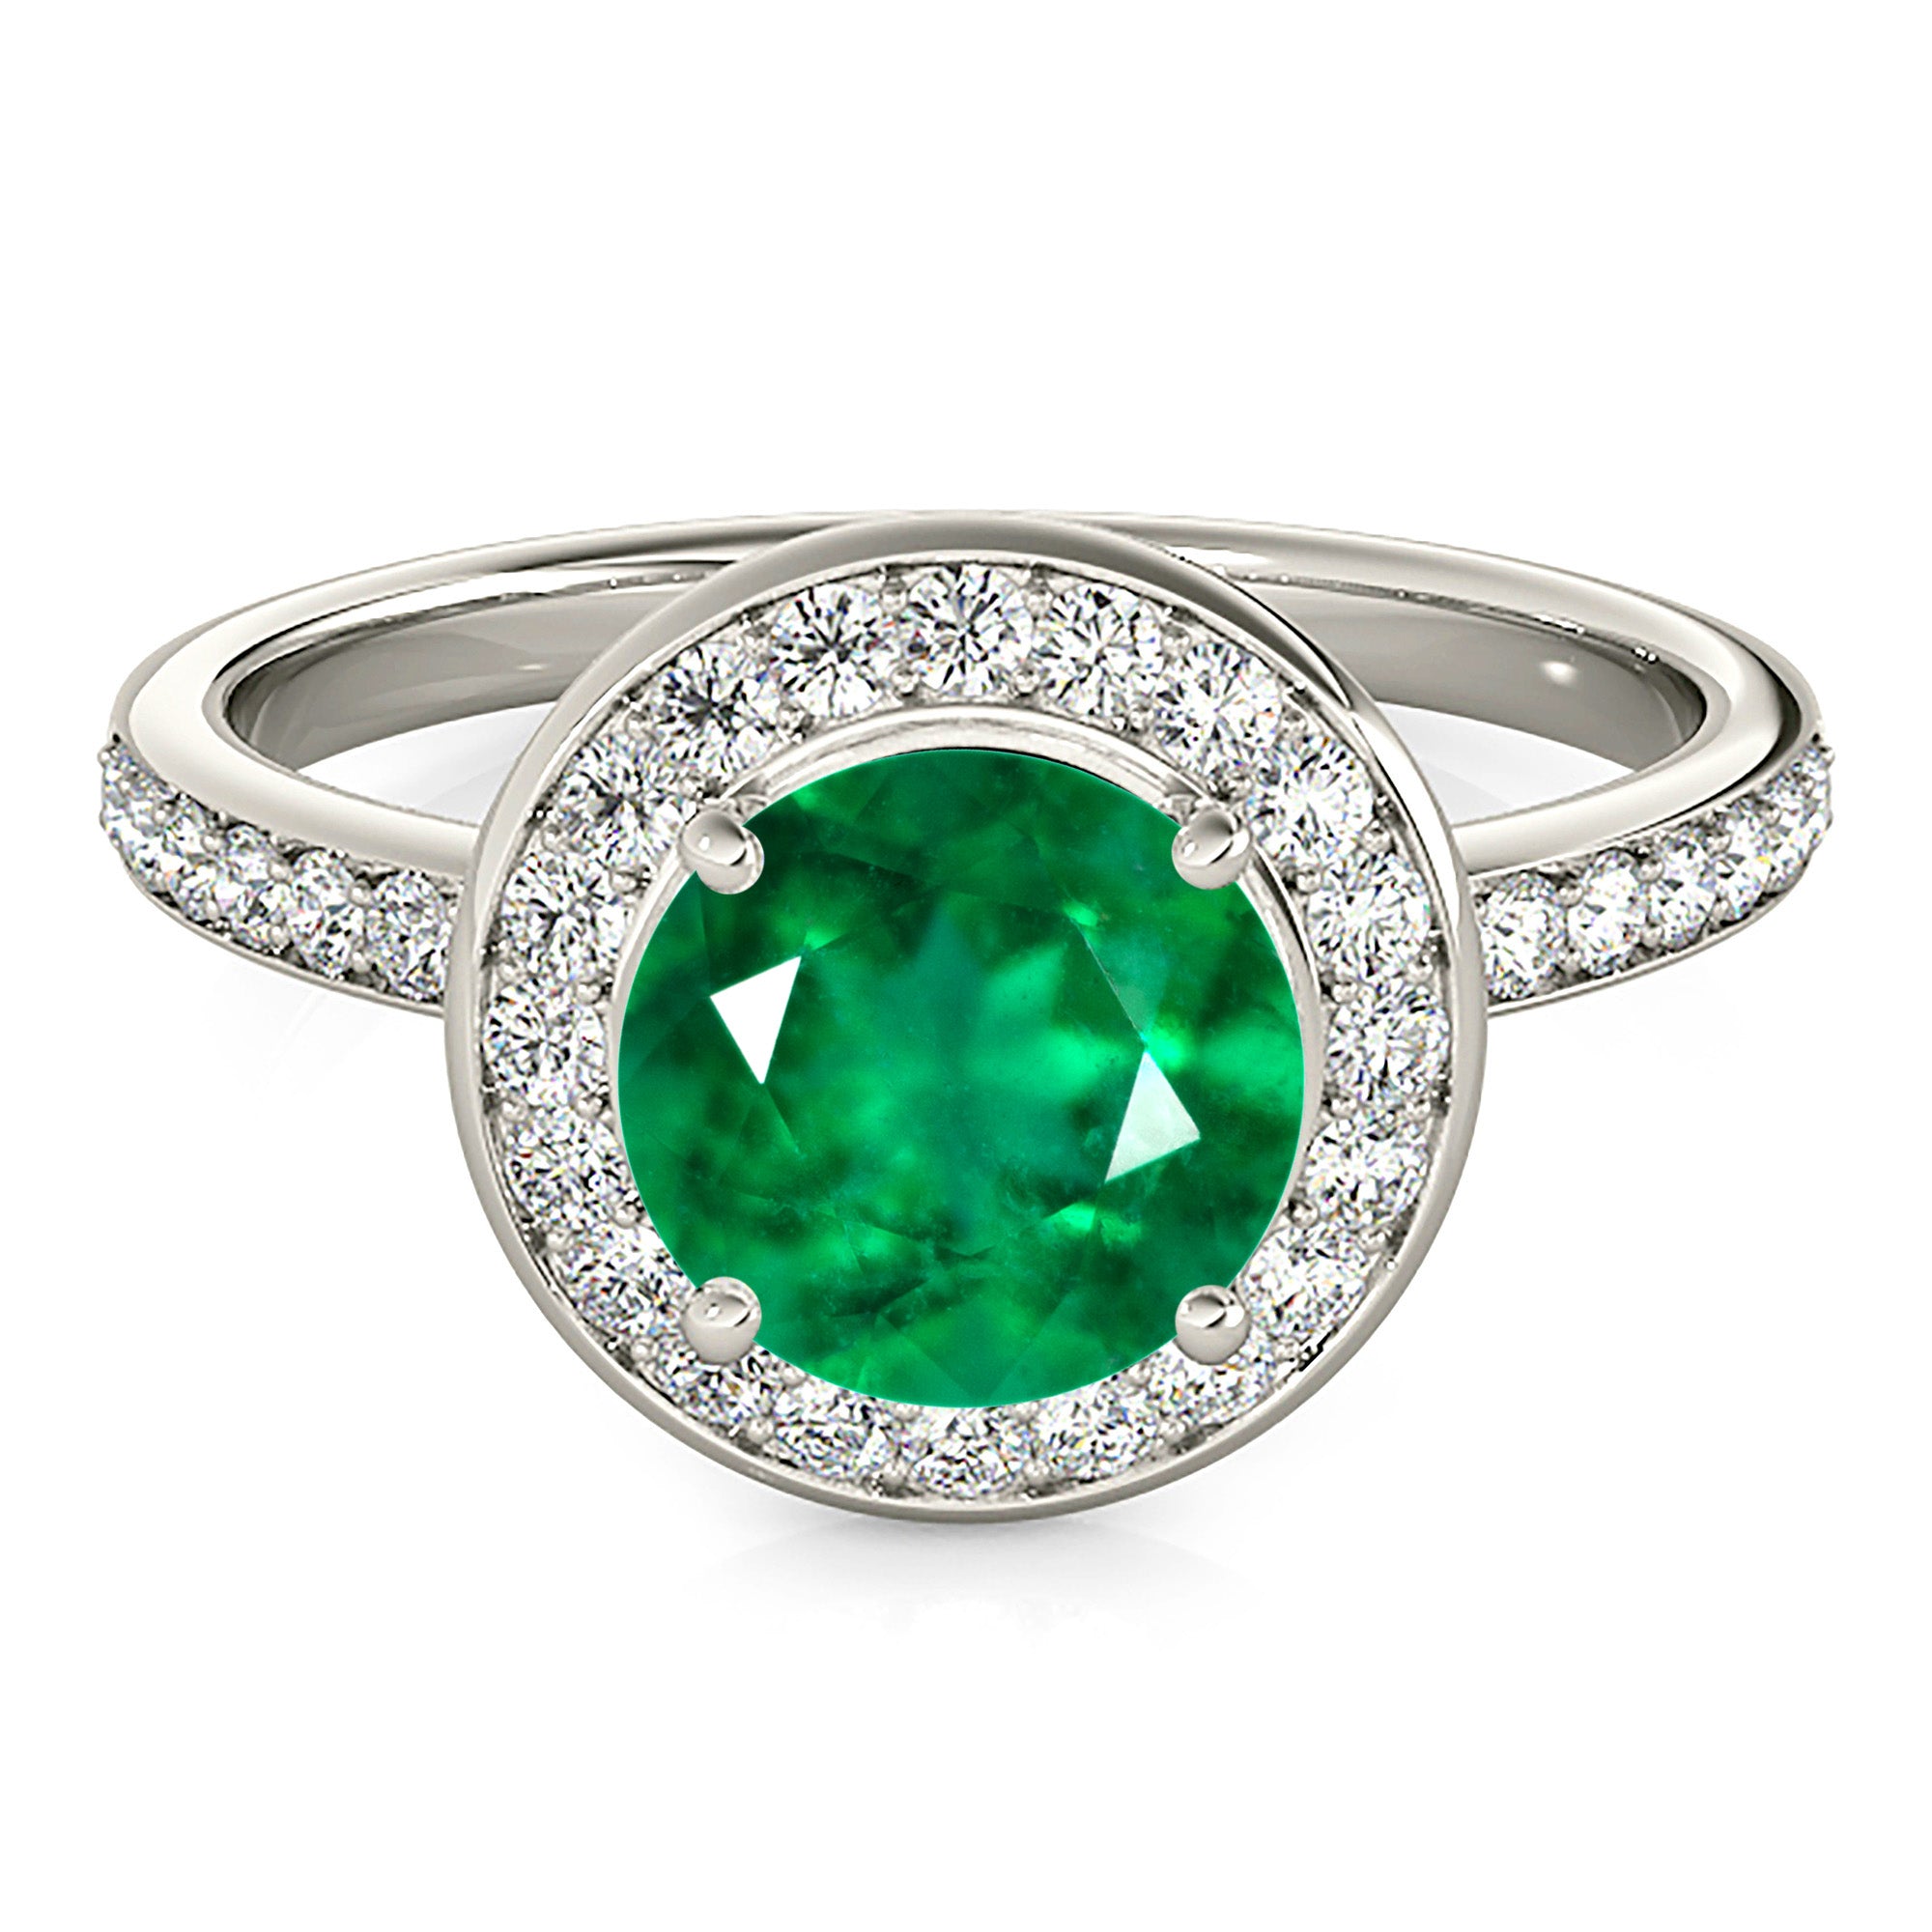 1.68 ct. Genuine Emerald Ring With 0.50 ctw. Channel Set Diamond Halo, Invisible Gallery-in 14K/18K White, Yellow, Rose Gold and Platinum - Christmas Jewelry Gift -VIRABYANI